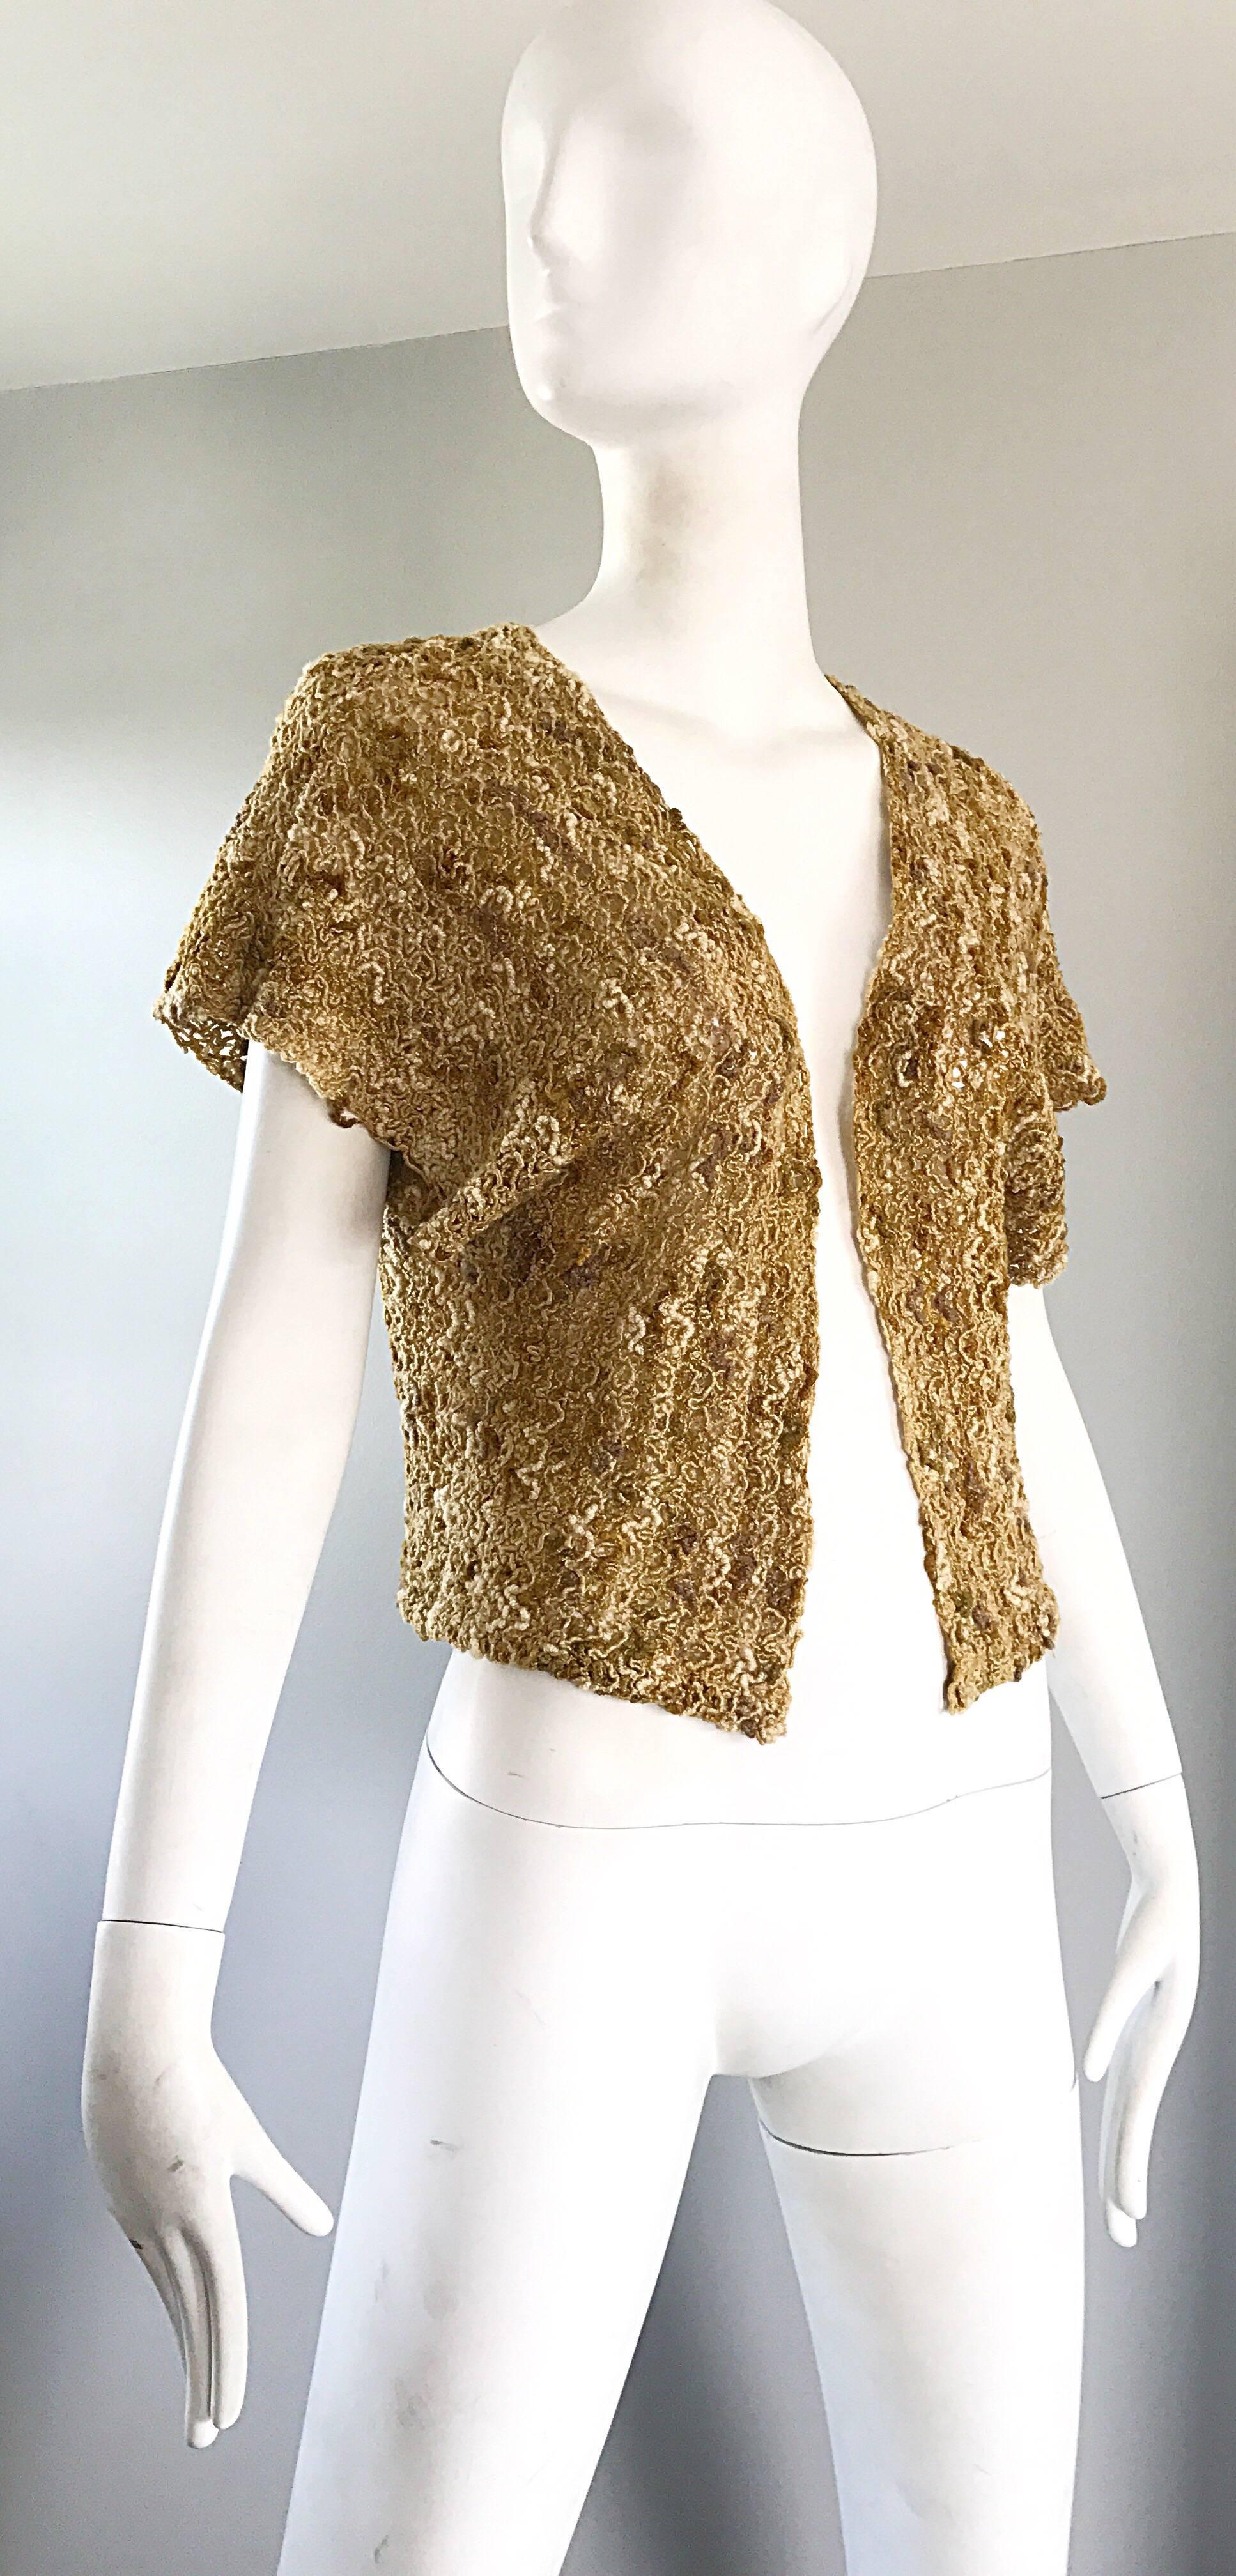 Chic 1970s Koret Boho Tan + Natural + Brown Hand Crochet Vintage 70s Shrug Jacke In Excellent Condition For Sale In San Diego, CA